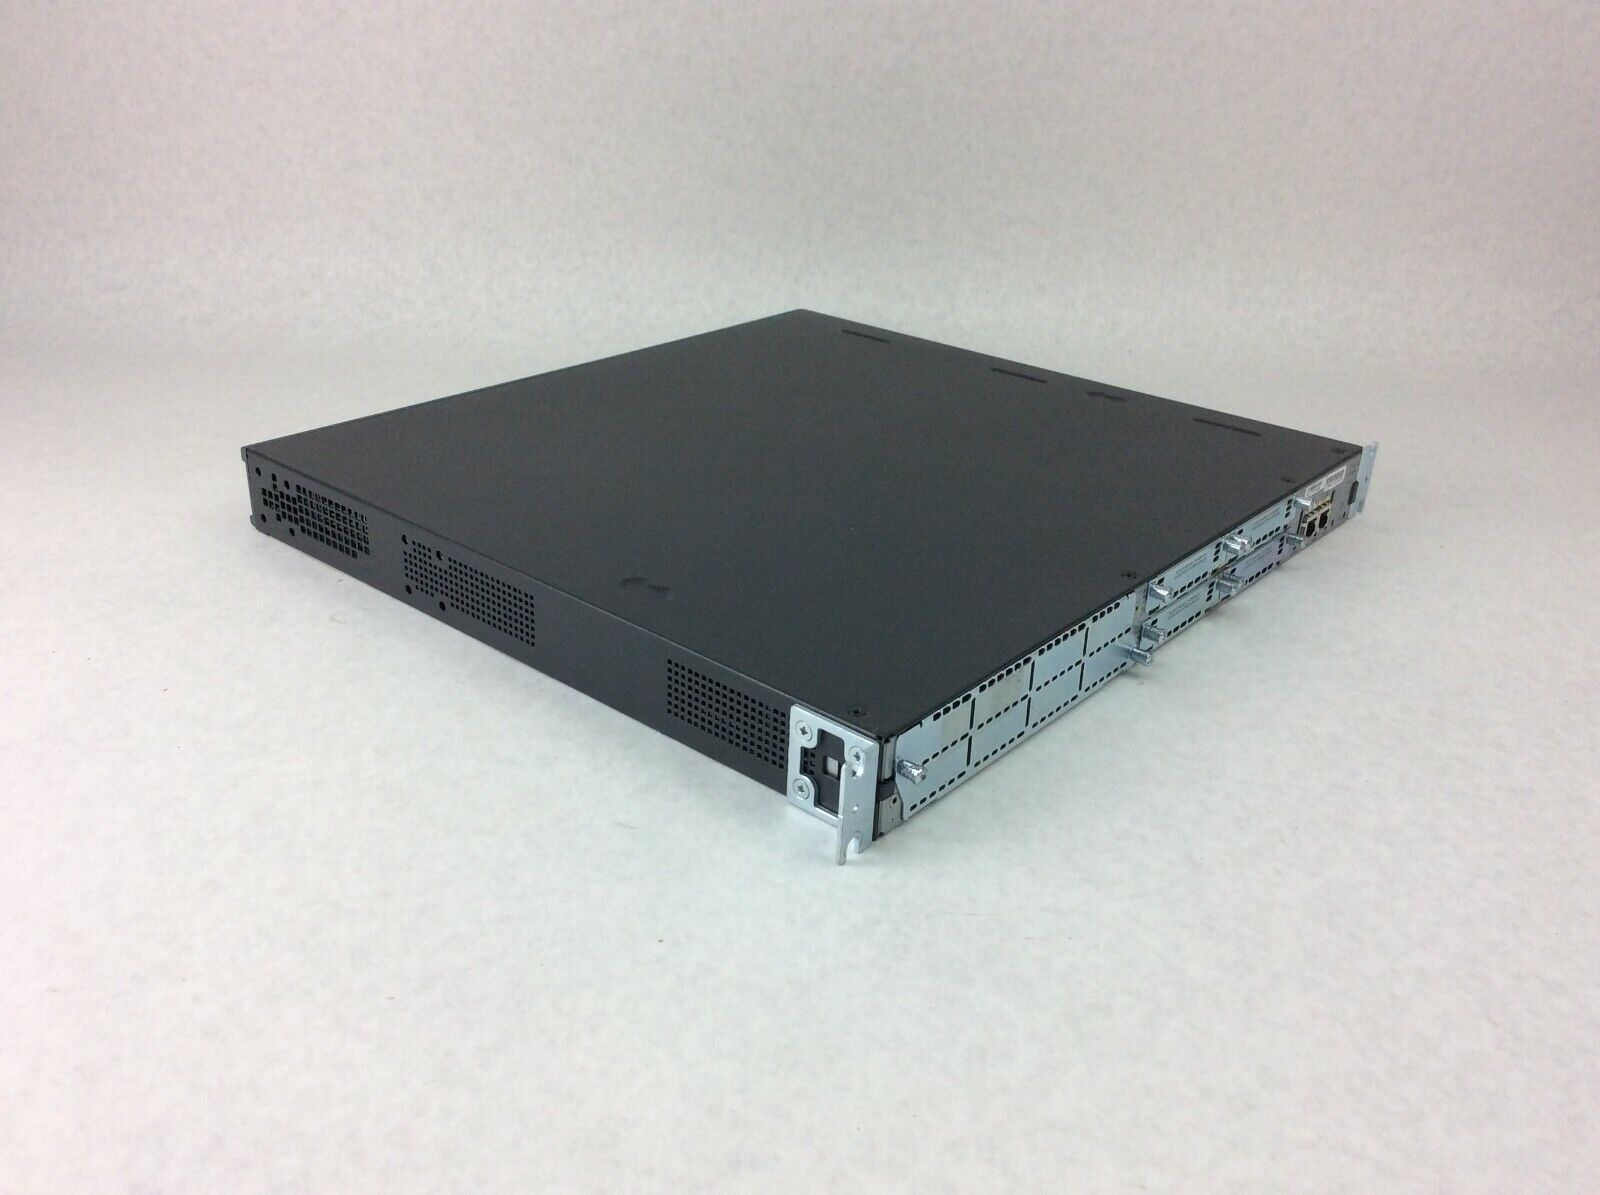 Cisco 2811 2800 Series Integrated Service Router - Tested